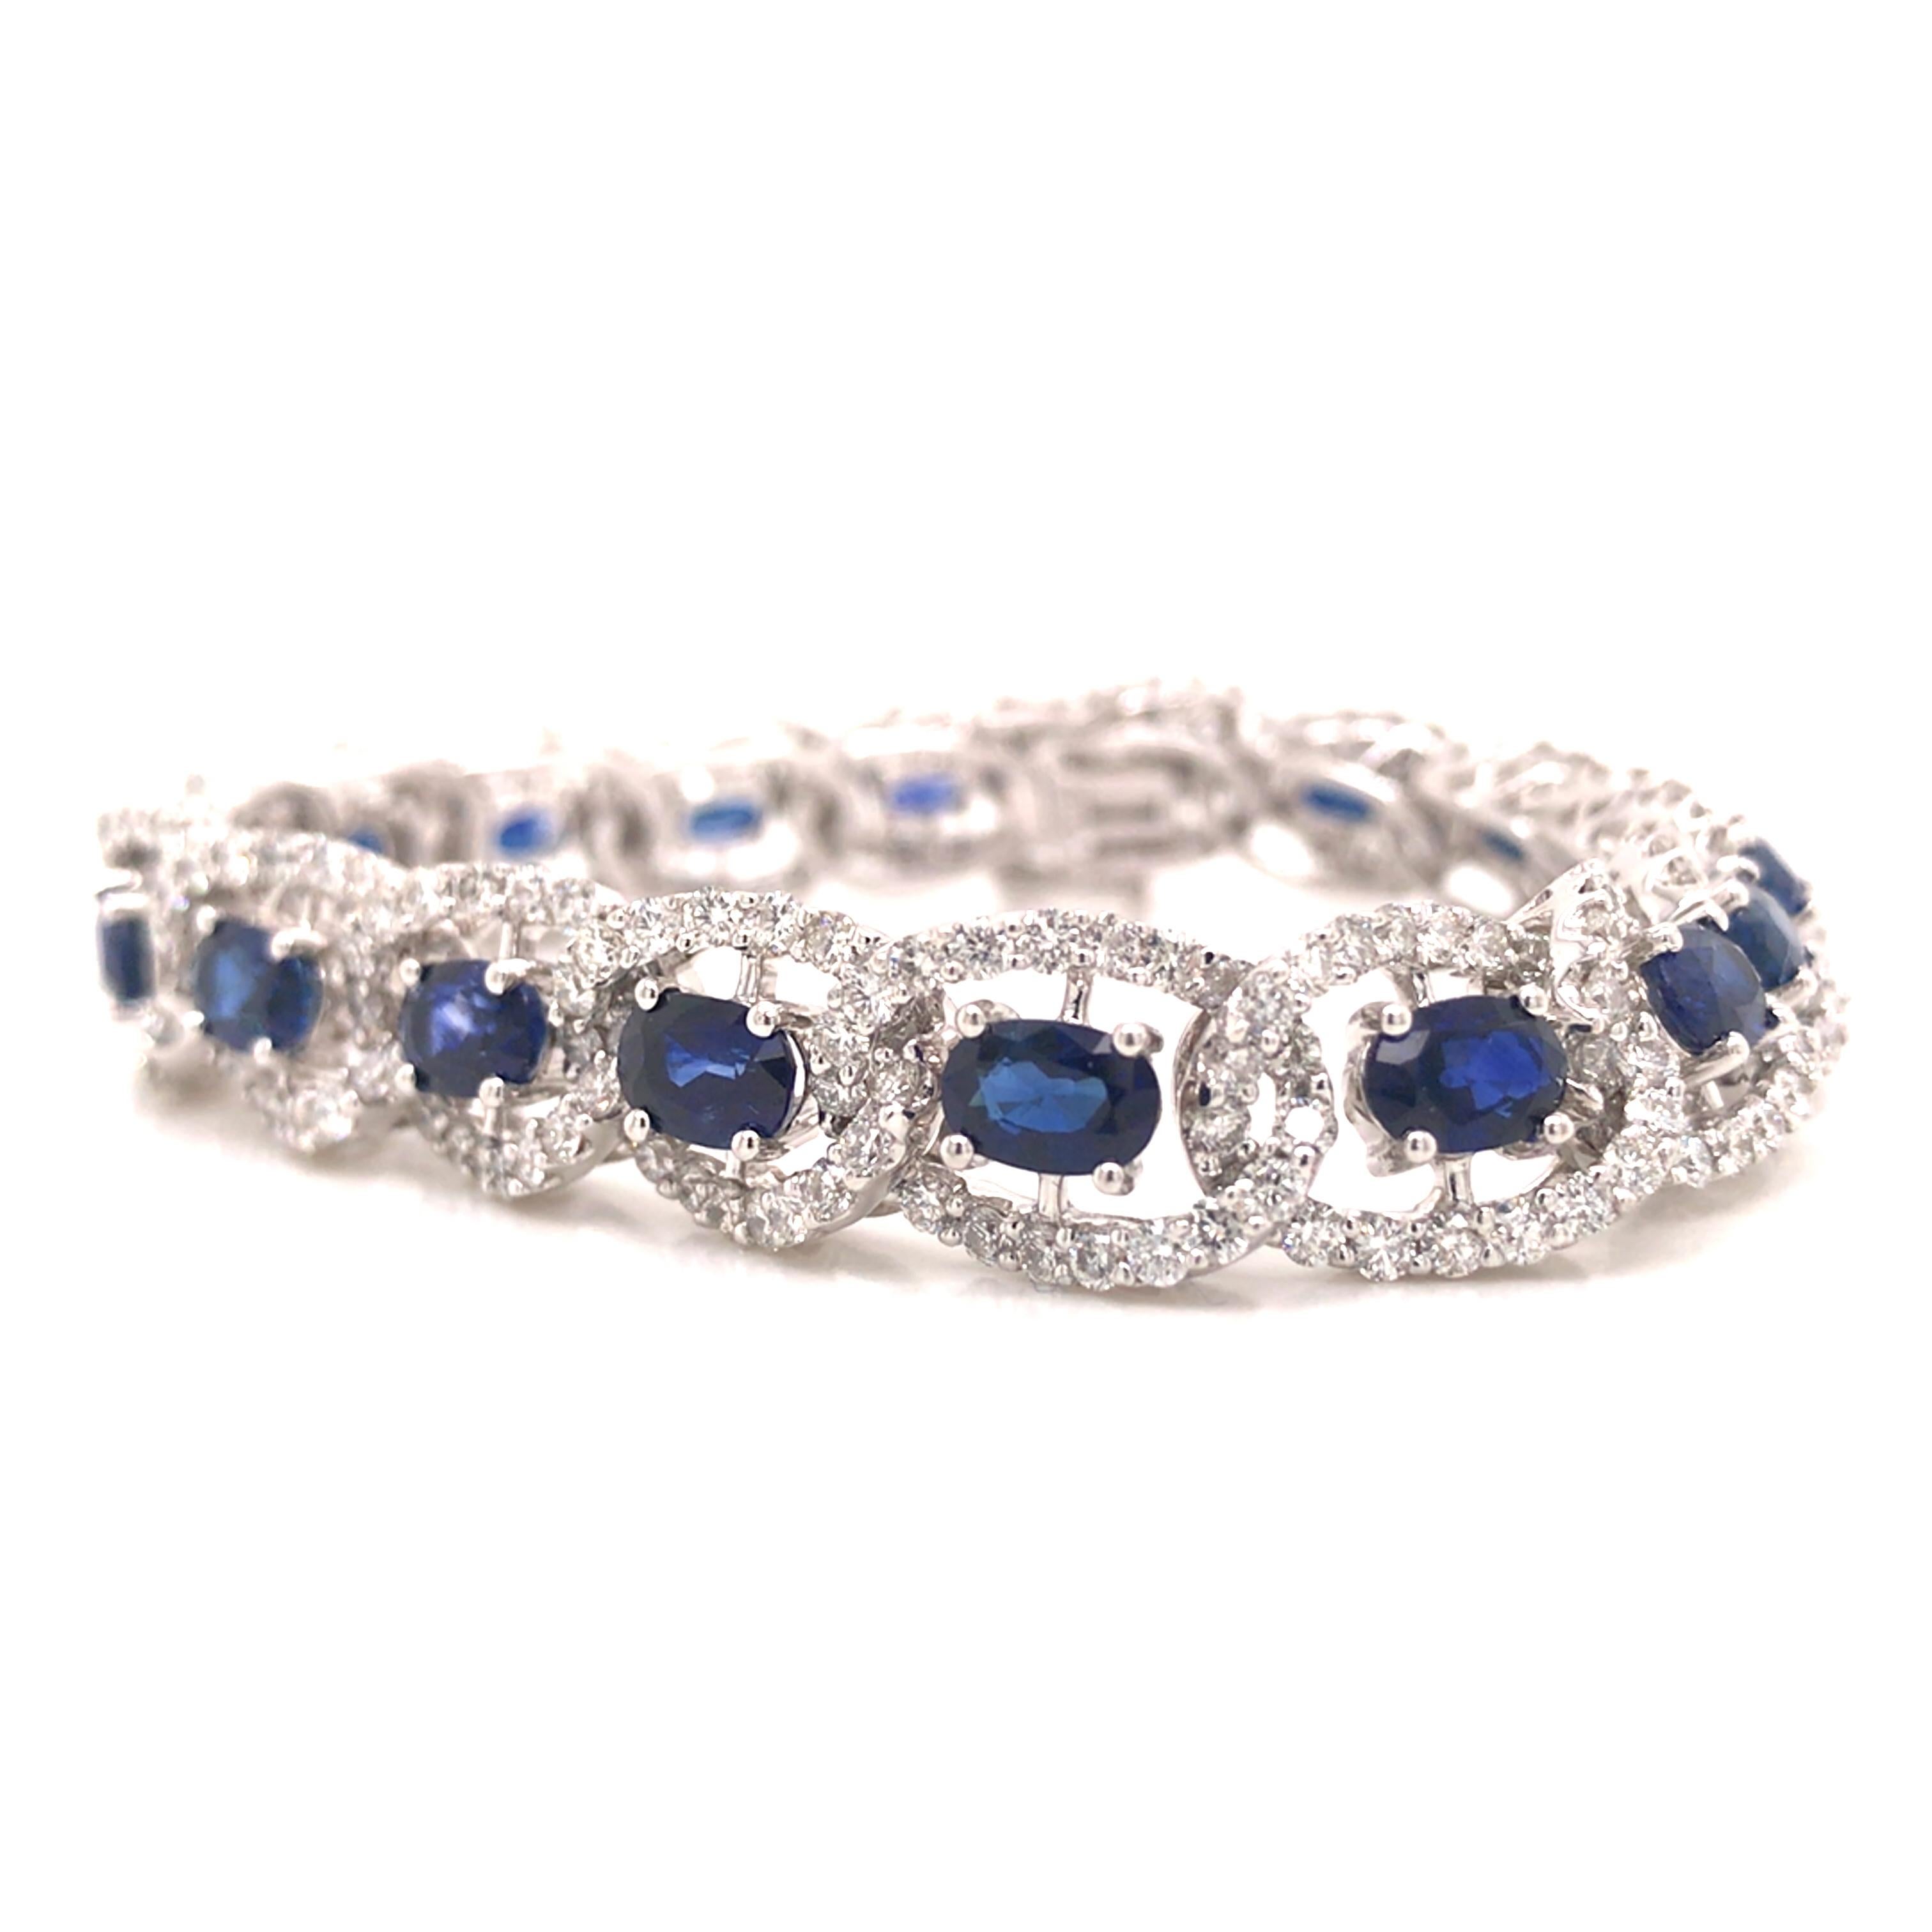 Diamond and Sapphire Link Tennis Bracelet in 18K White Gold.  Round Brilliant Cut Diamonds weighing 6.50 carat total weight, G-H in color and VS in clarity and Blue Oval Sapphires weighing 12 carat total weight are expertly set.  The Bracelet